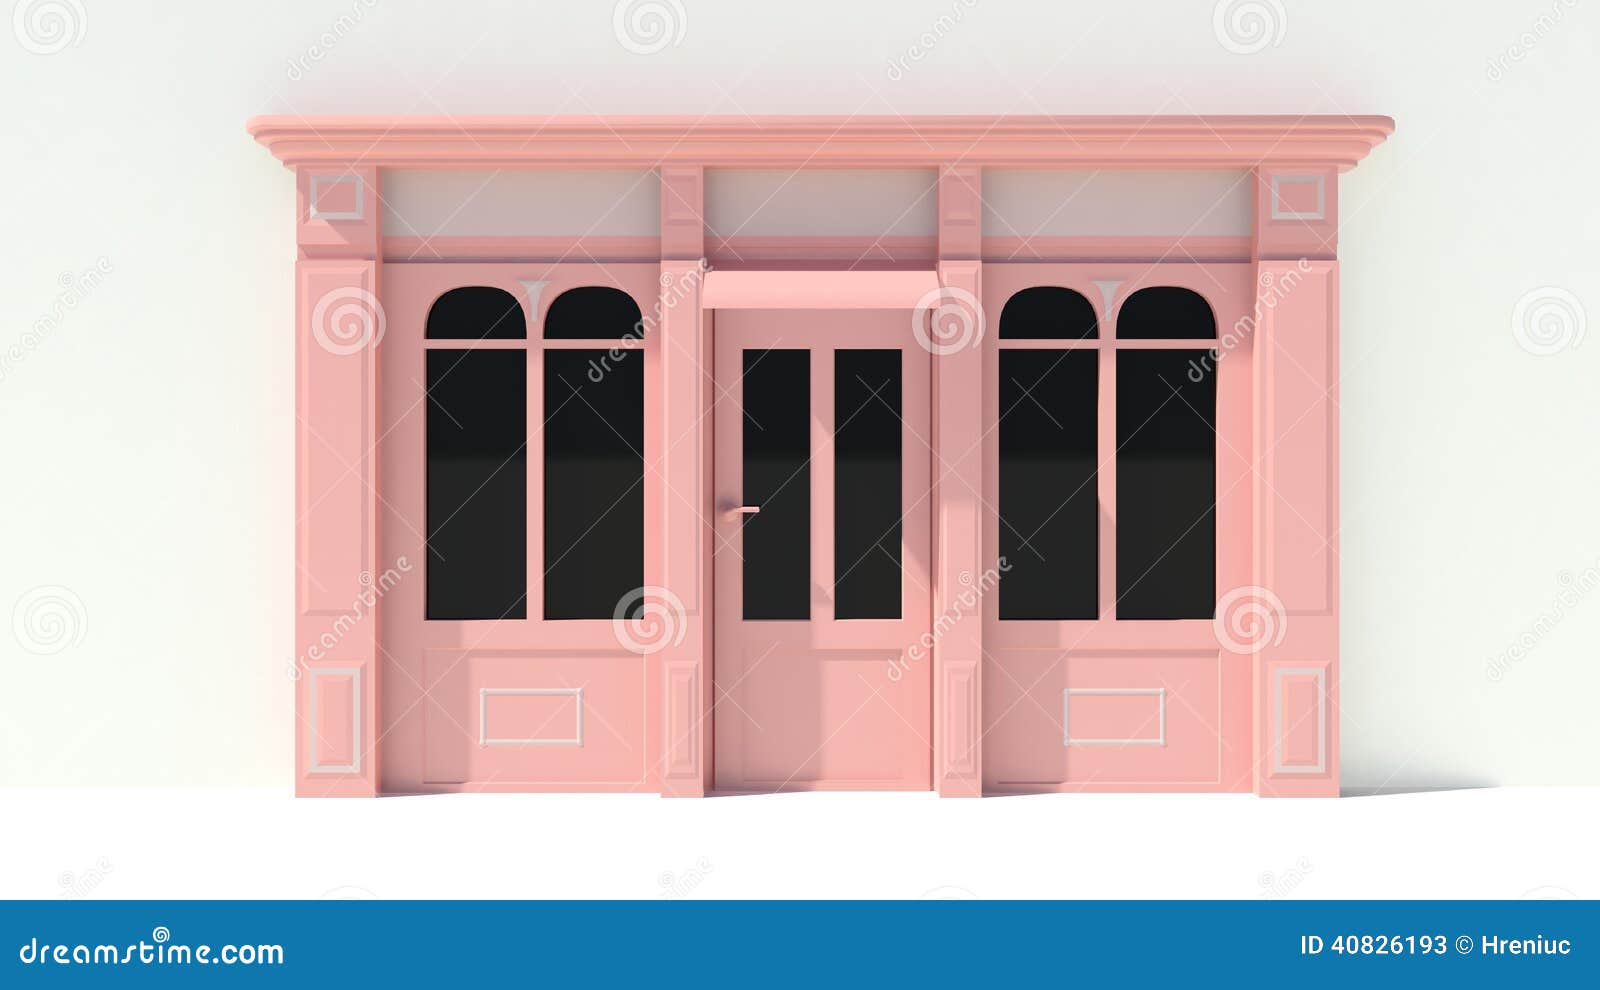 sunny shopfront with large windows white and pink store facade with awnings